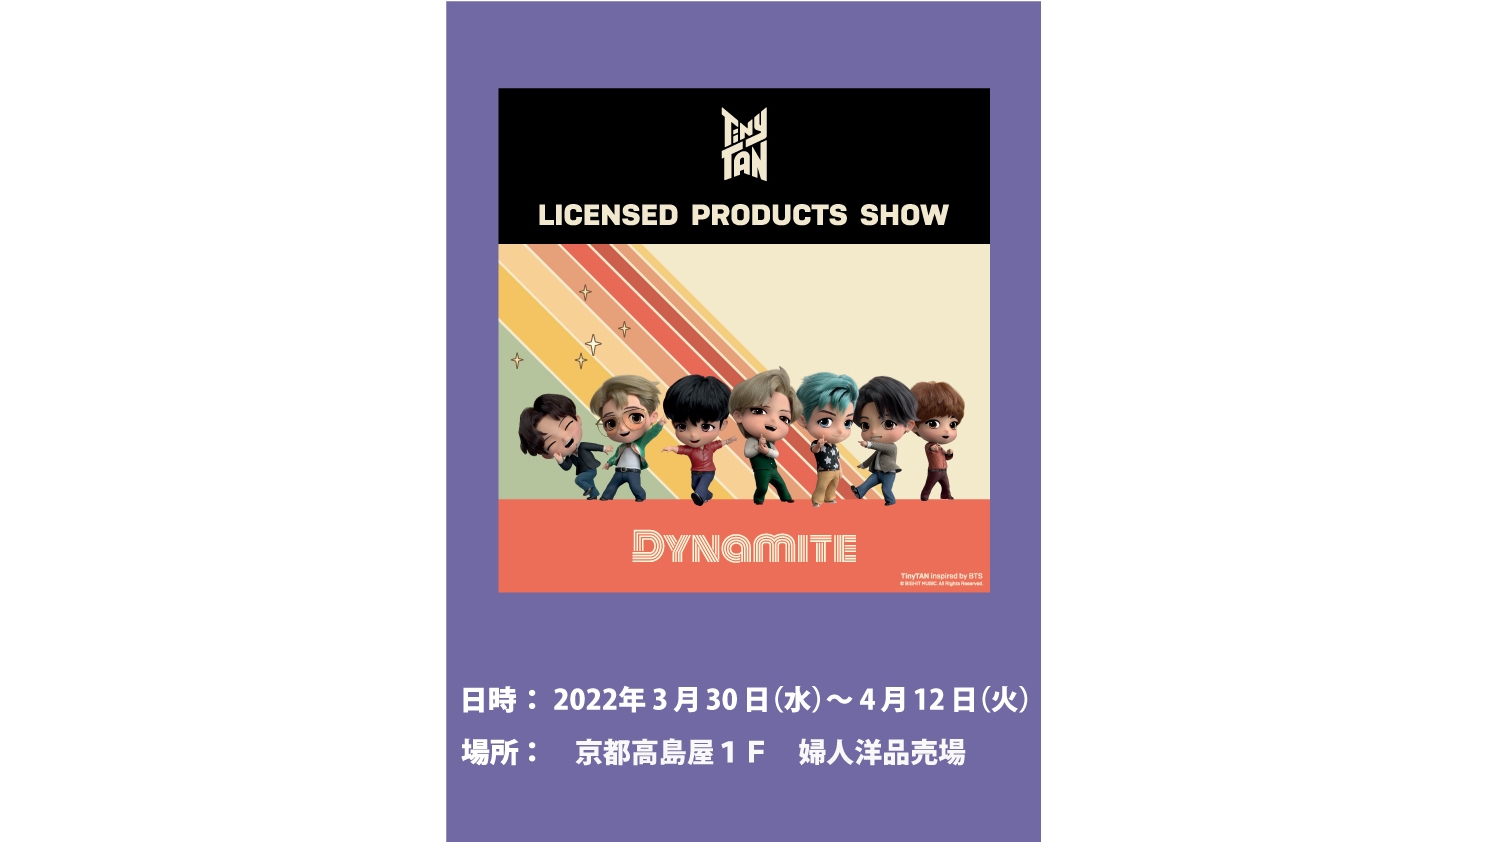 bts-licensed-products-show1-2